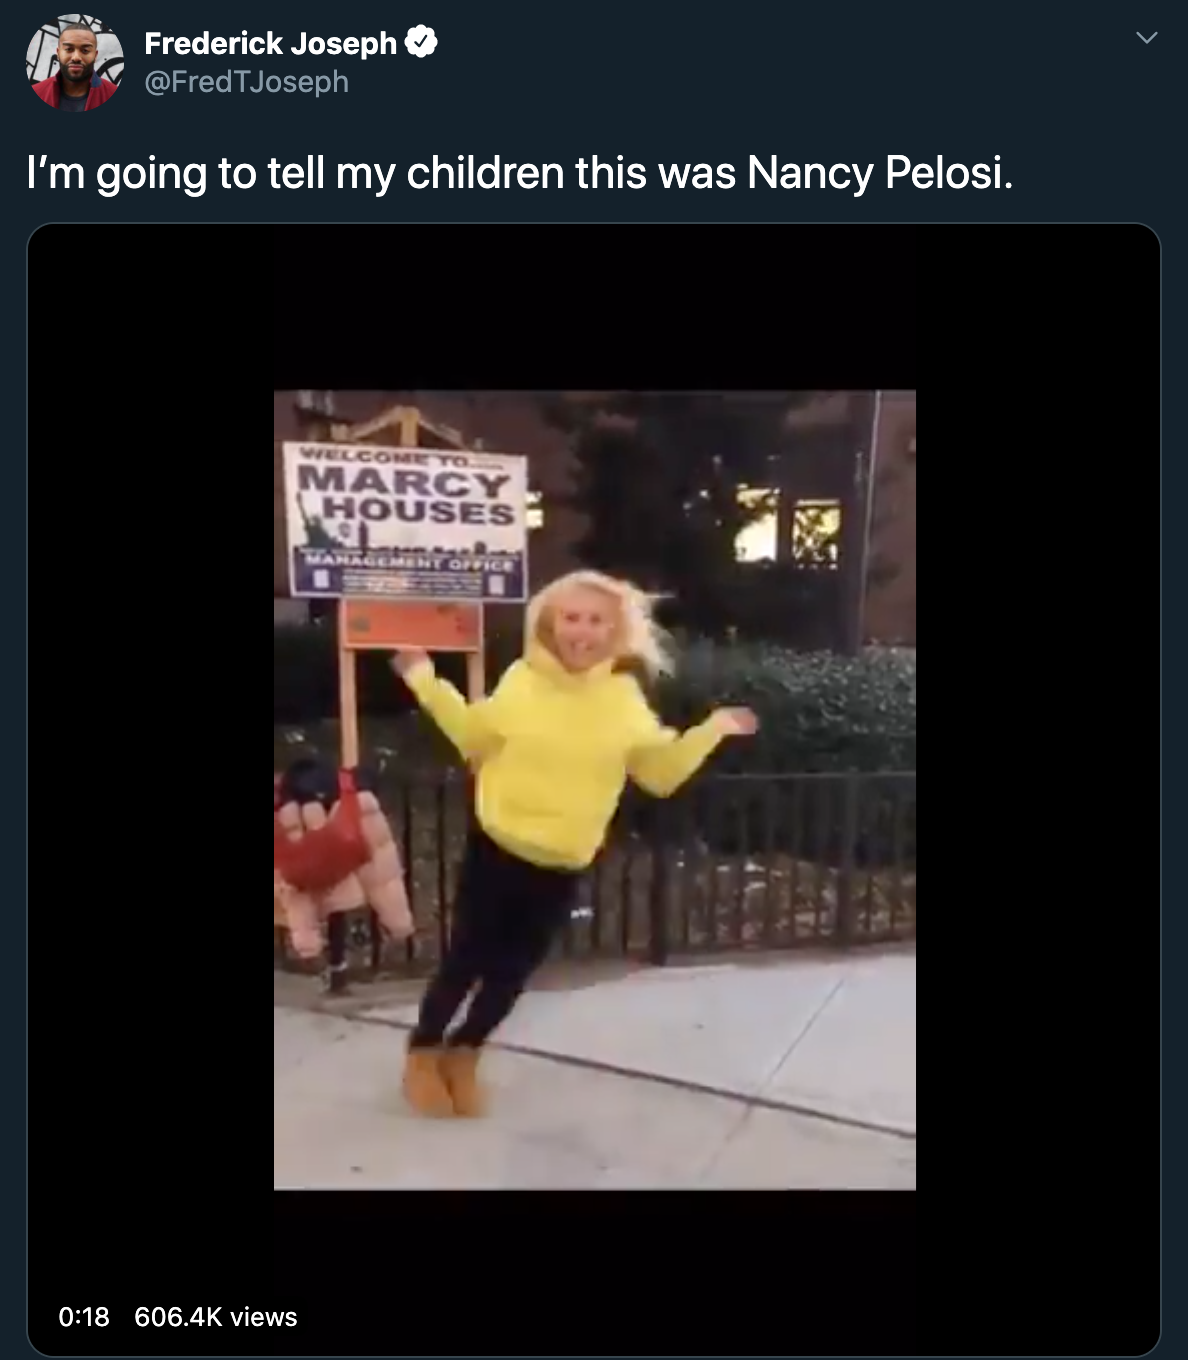 I'm going to tell my children this was Nancy Pelosi. Marcy Houses